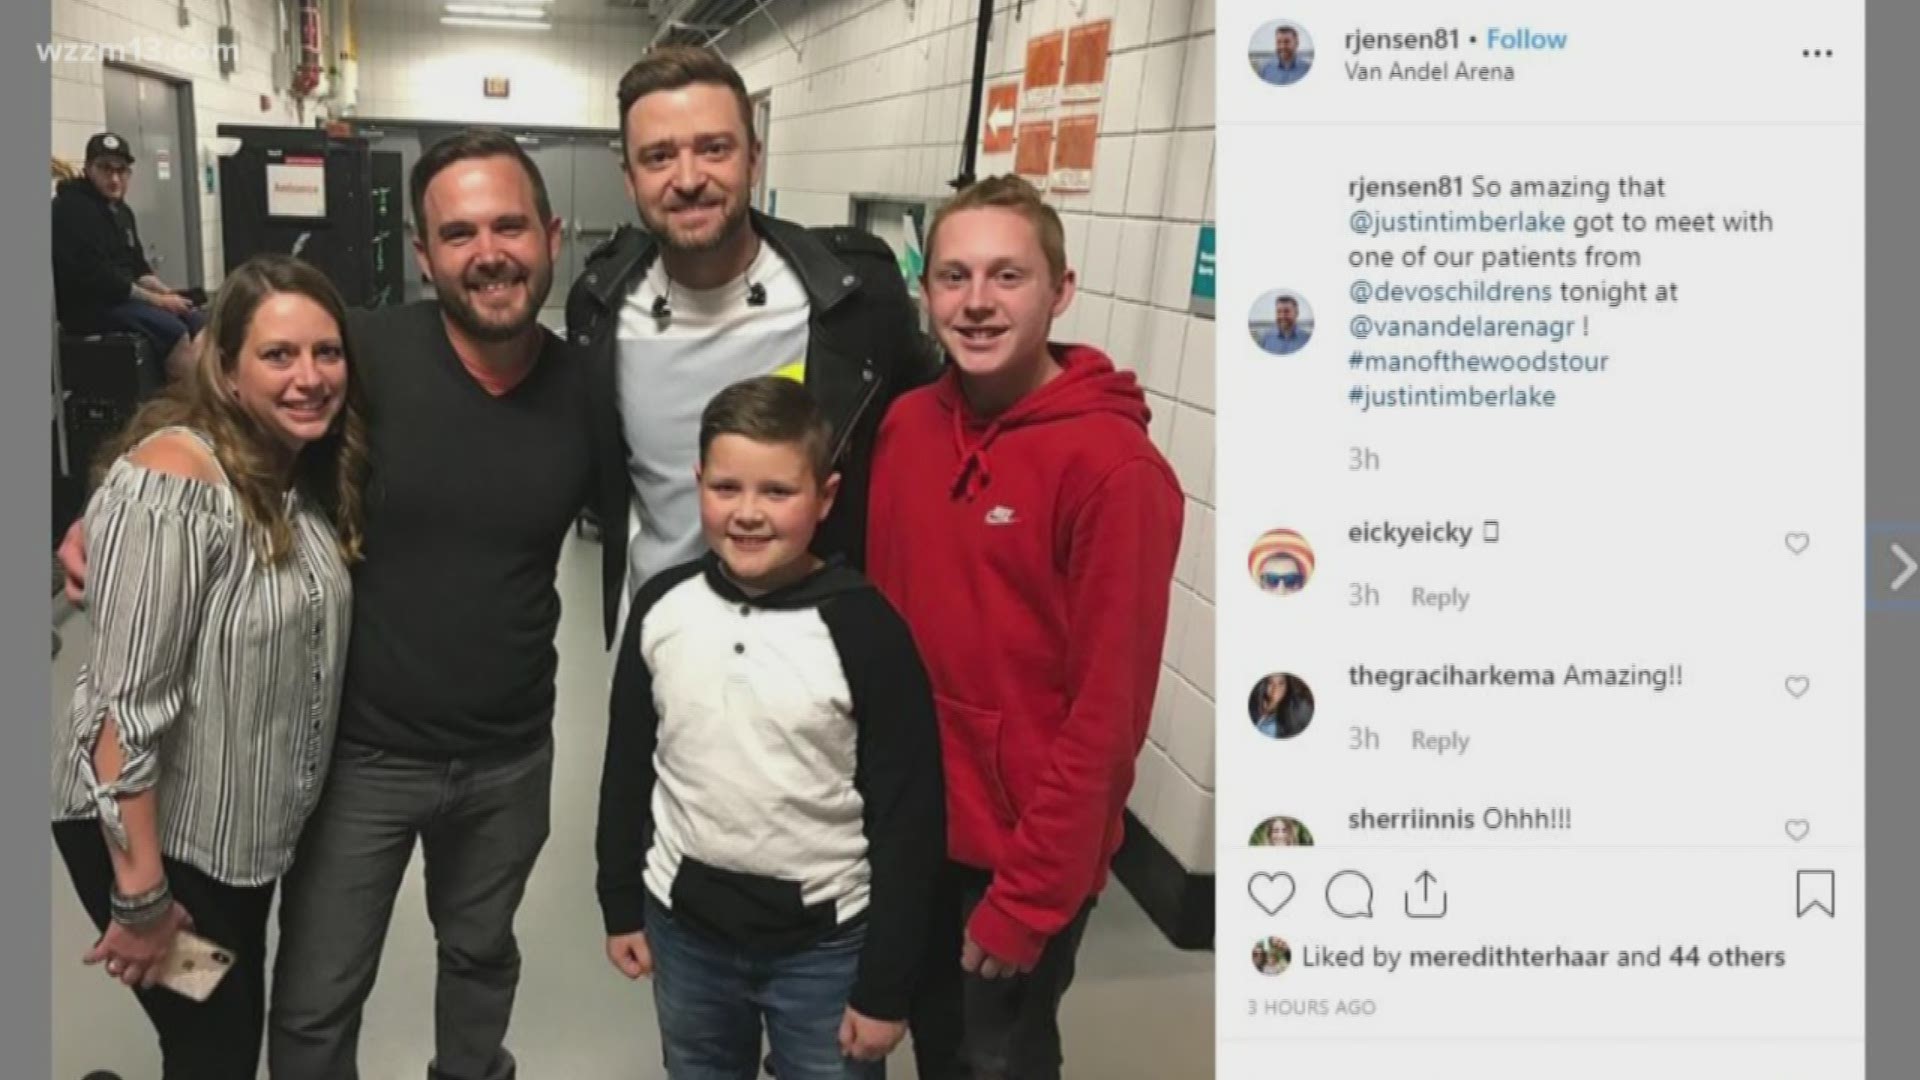 Not only did two-time cancer survivor Isaac Walker get free tickets to Justin Timberlake's Thursday night concert at Van Andel Arena, he got to meet the pop star backstage.